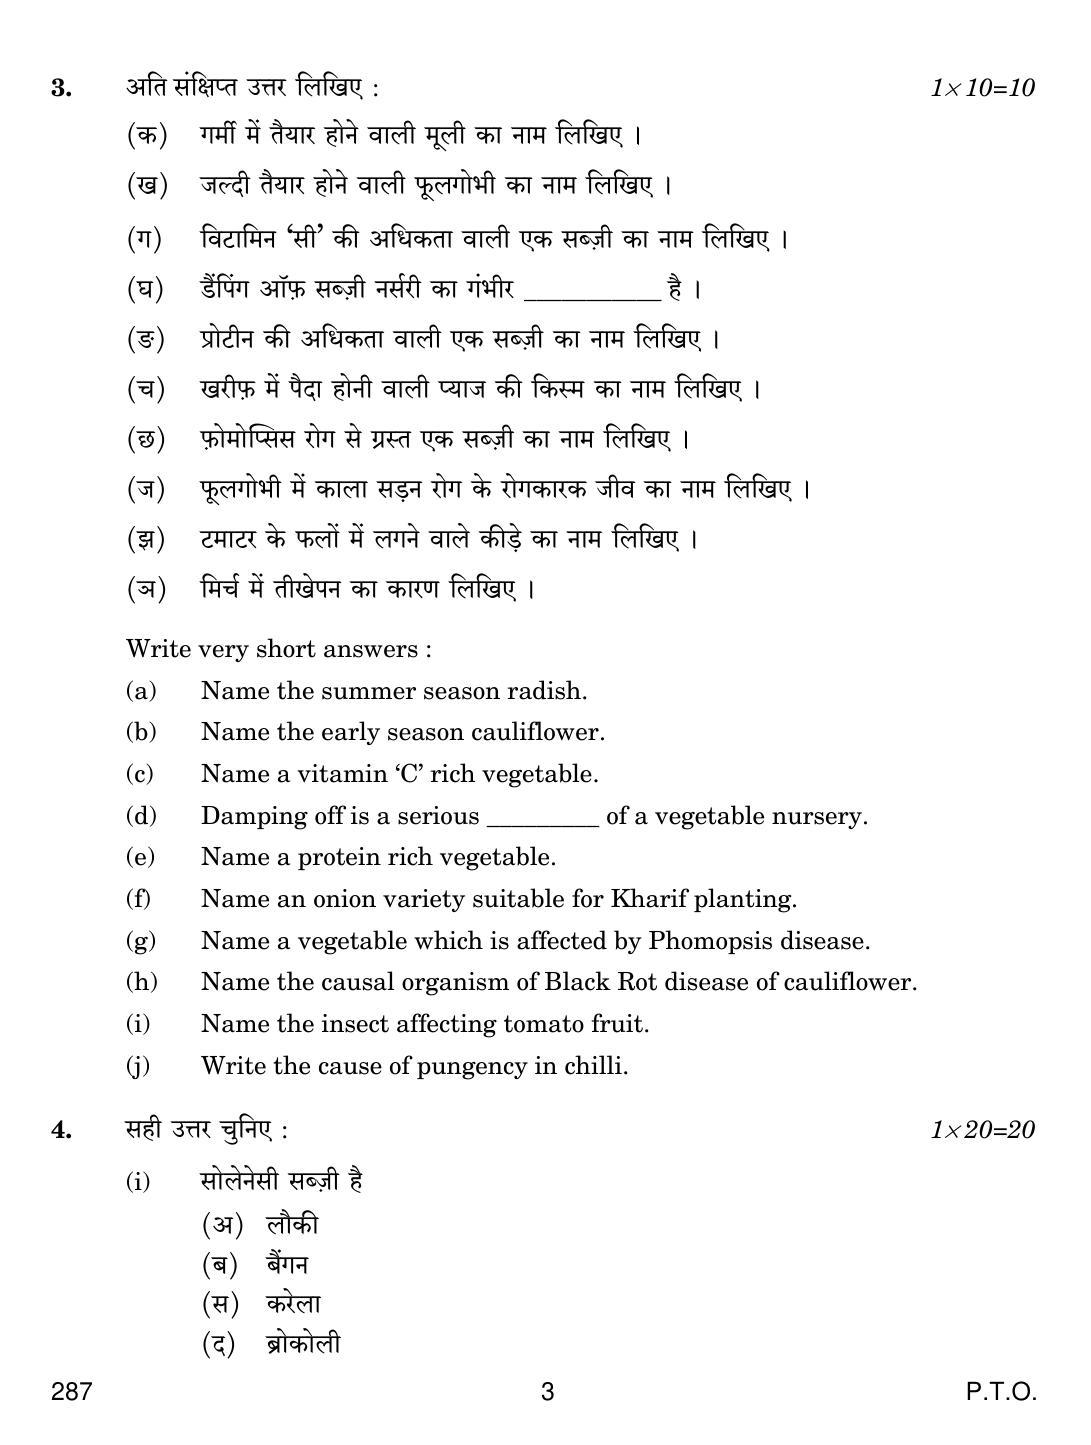 CBSE Class 12 287 OLERICULTURE 2018 Question Paper - Page 3